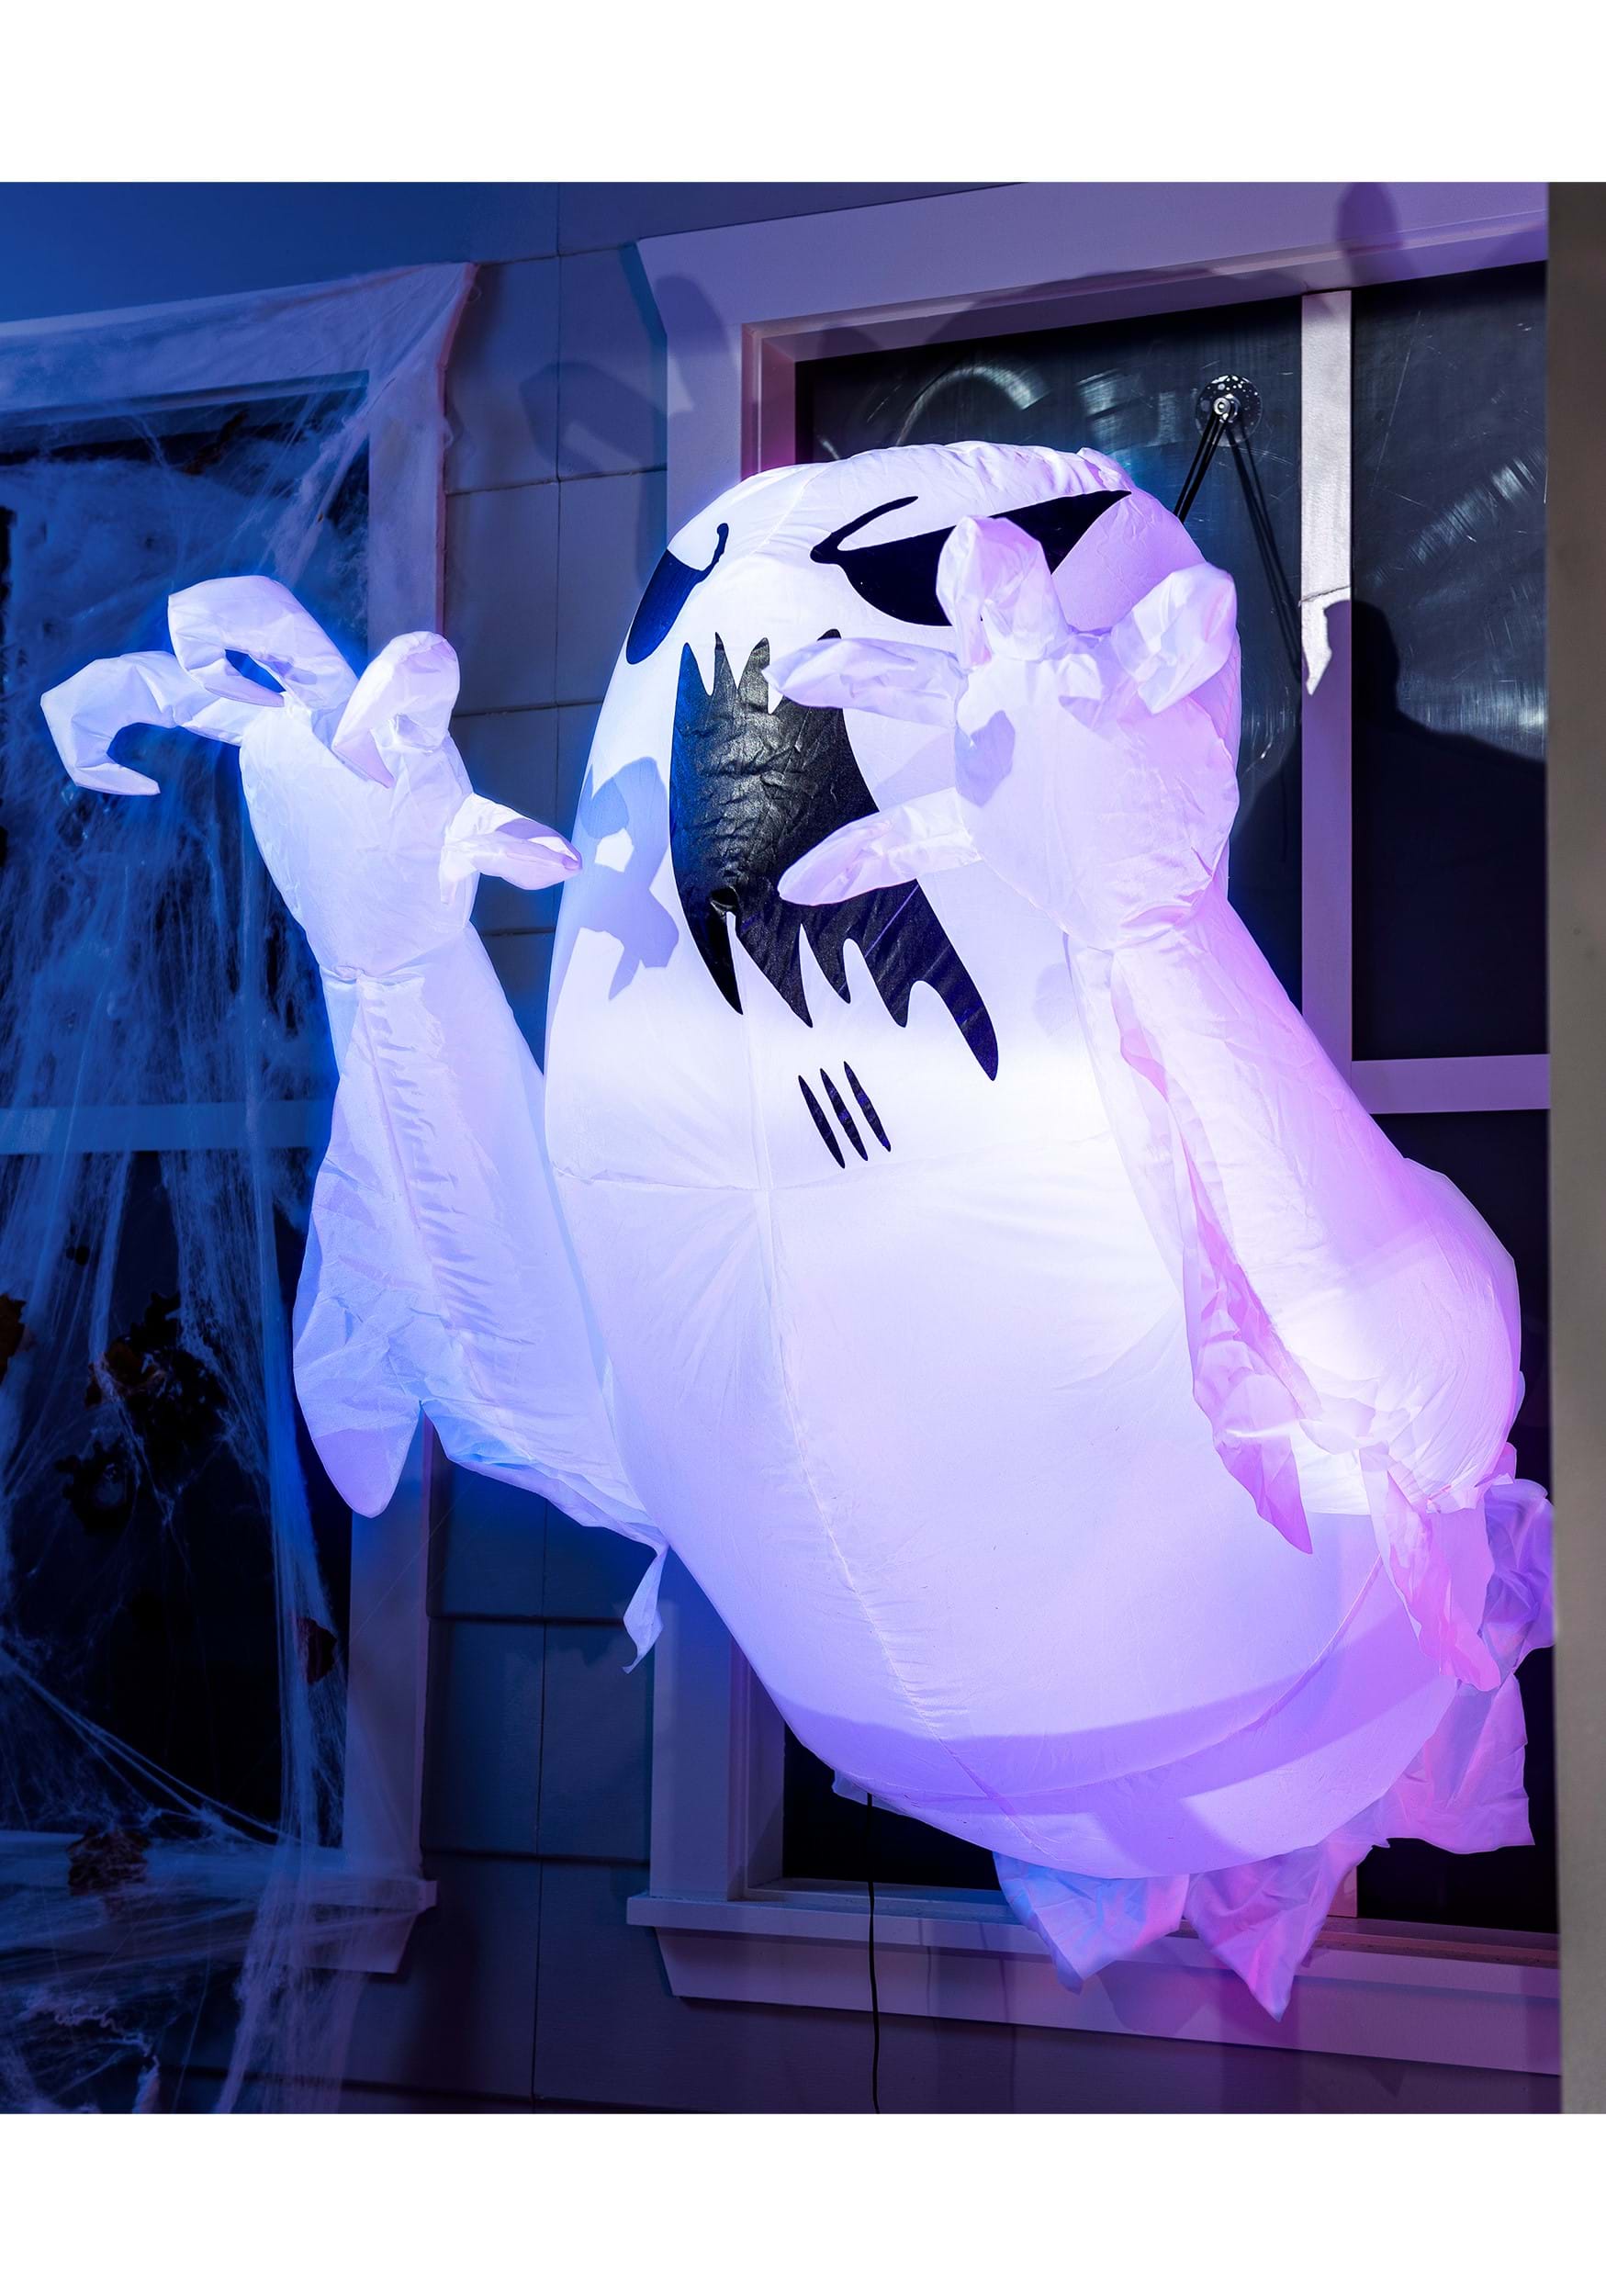 Window Breaker Ghost Inflatable 5FT Tall Decoration